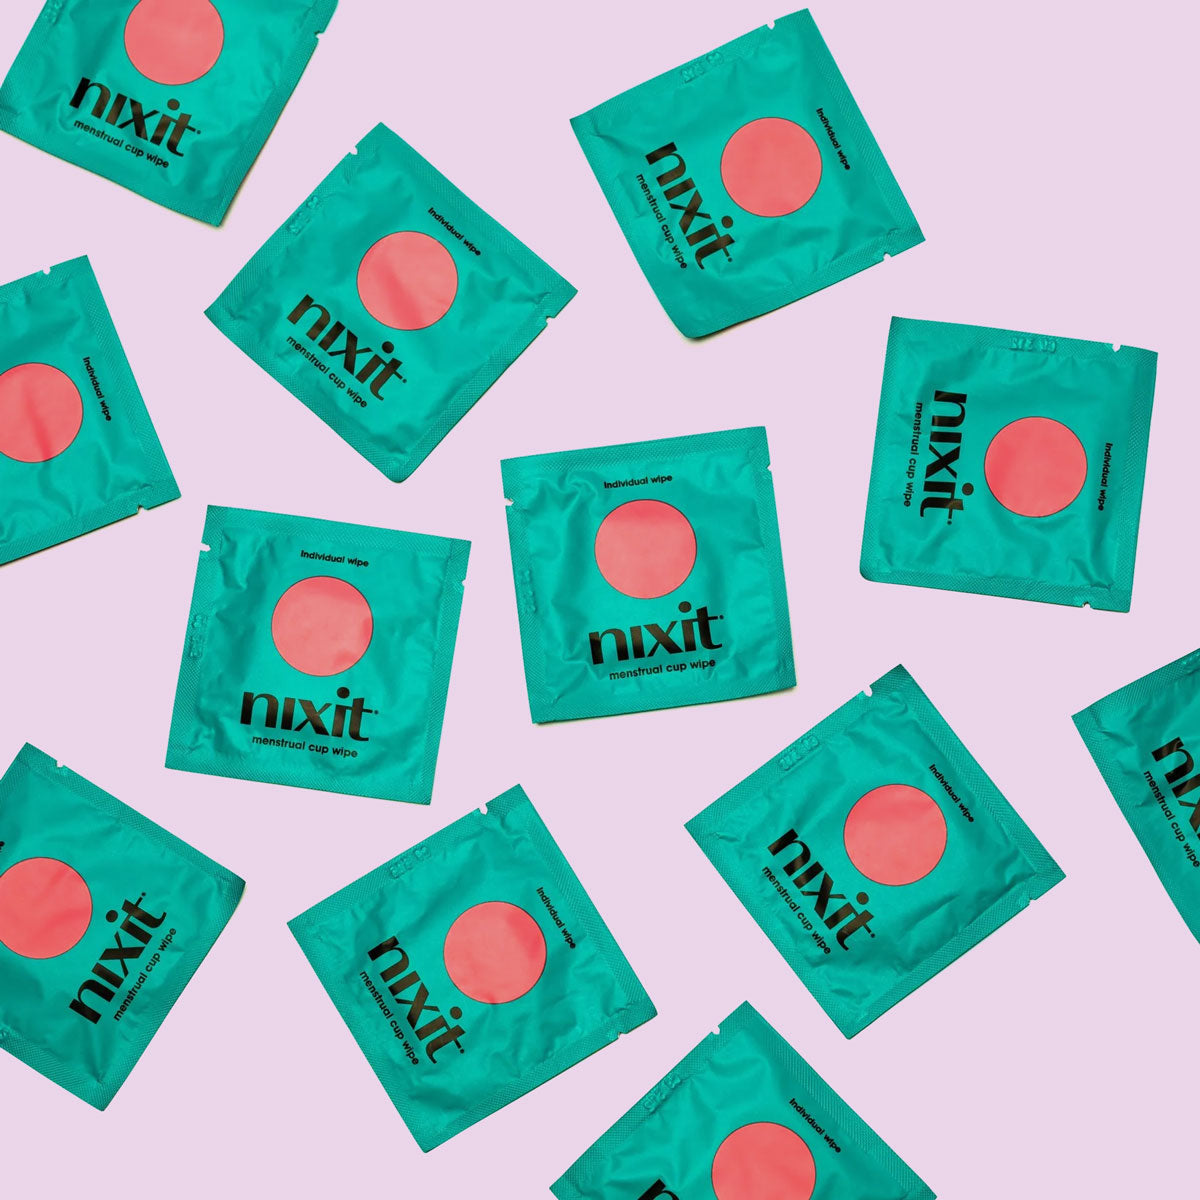 Nixit menstrual cup wipes individual packages in green on a purple background